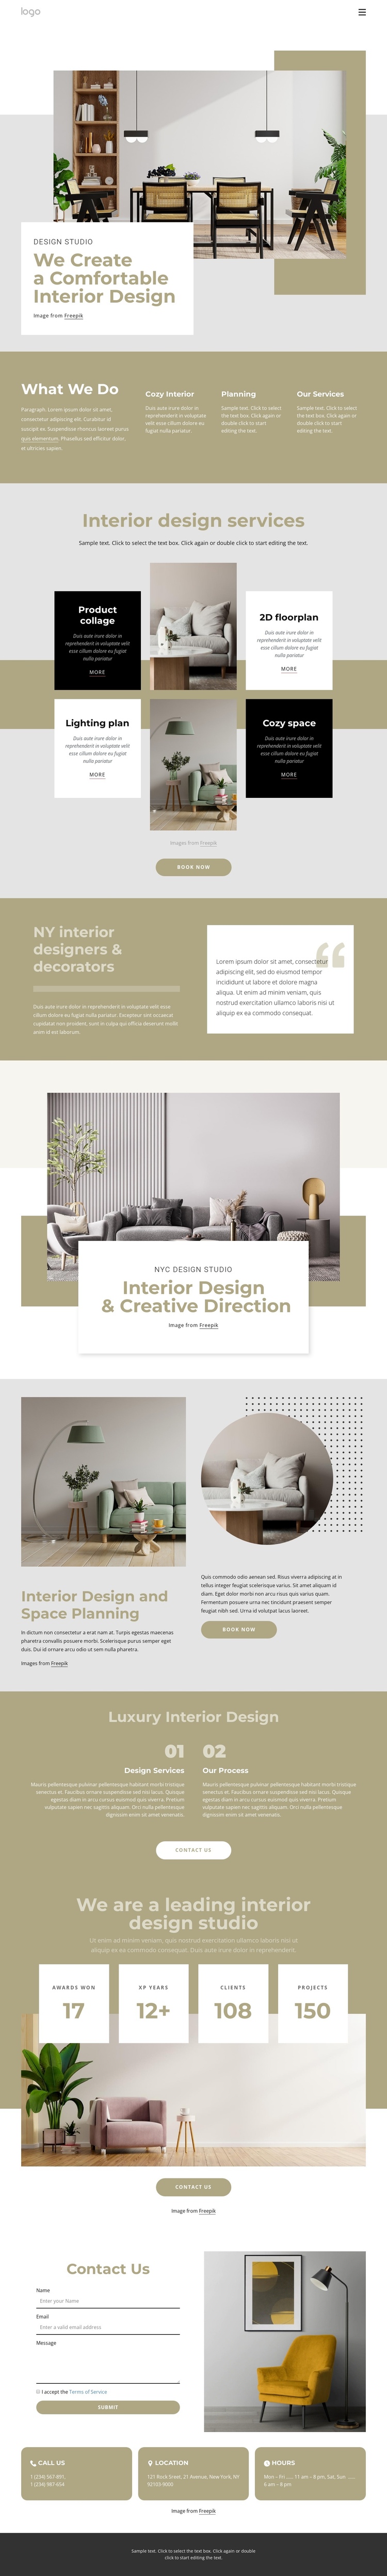 We create a comfortable interiors One Page Template